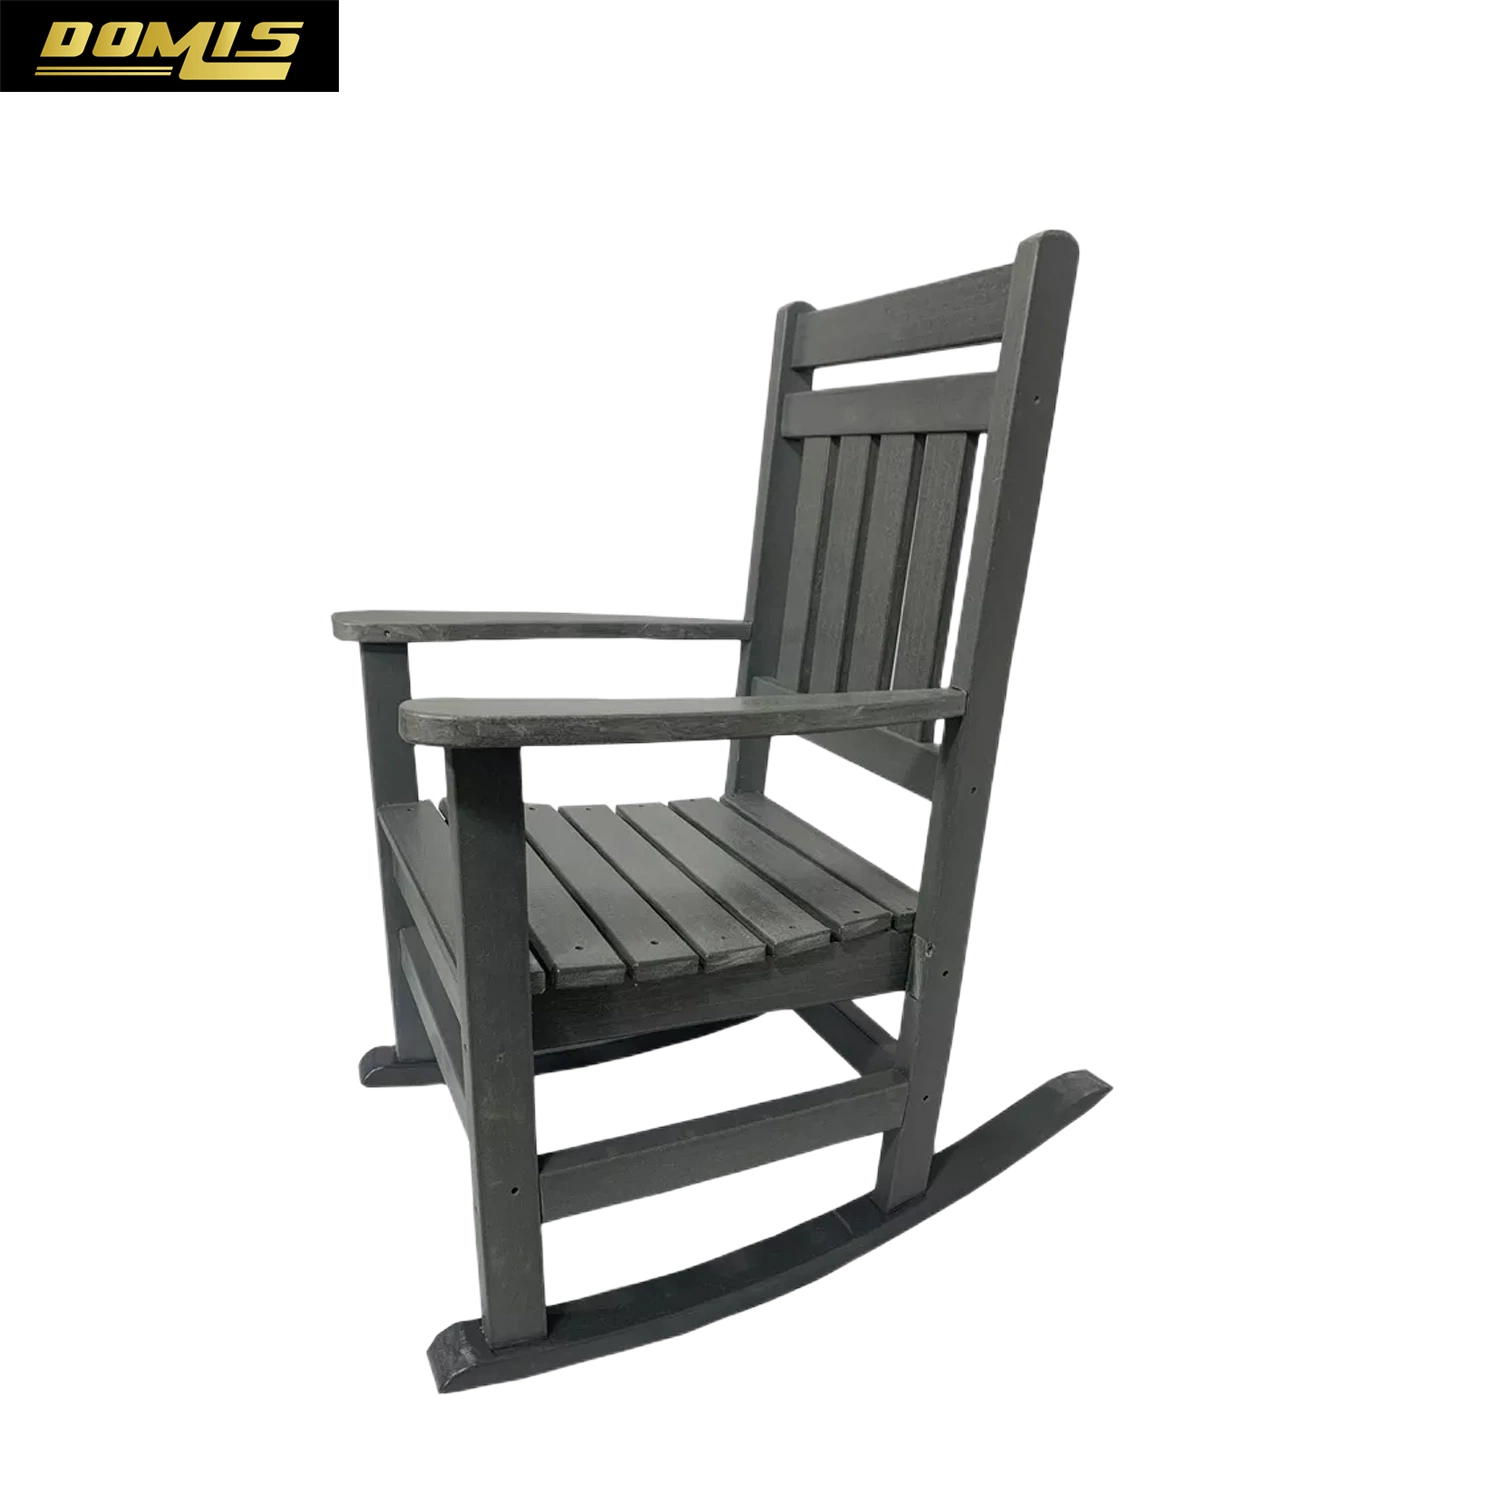 High Quality Recycled HDPE Rocking Chair Outdoor HDPE Adirondack Chair for Patio Garden